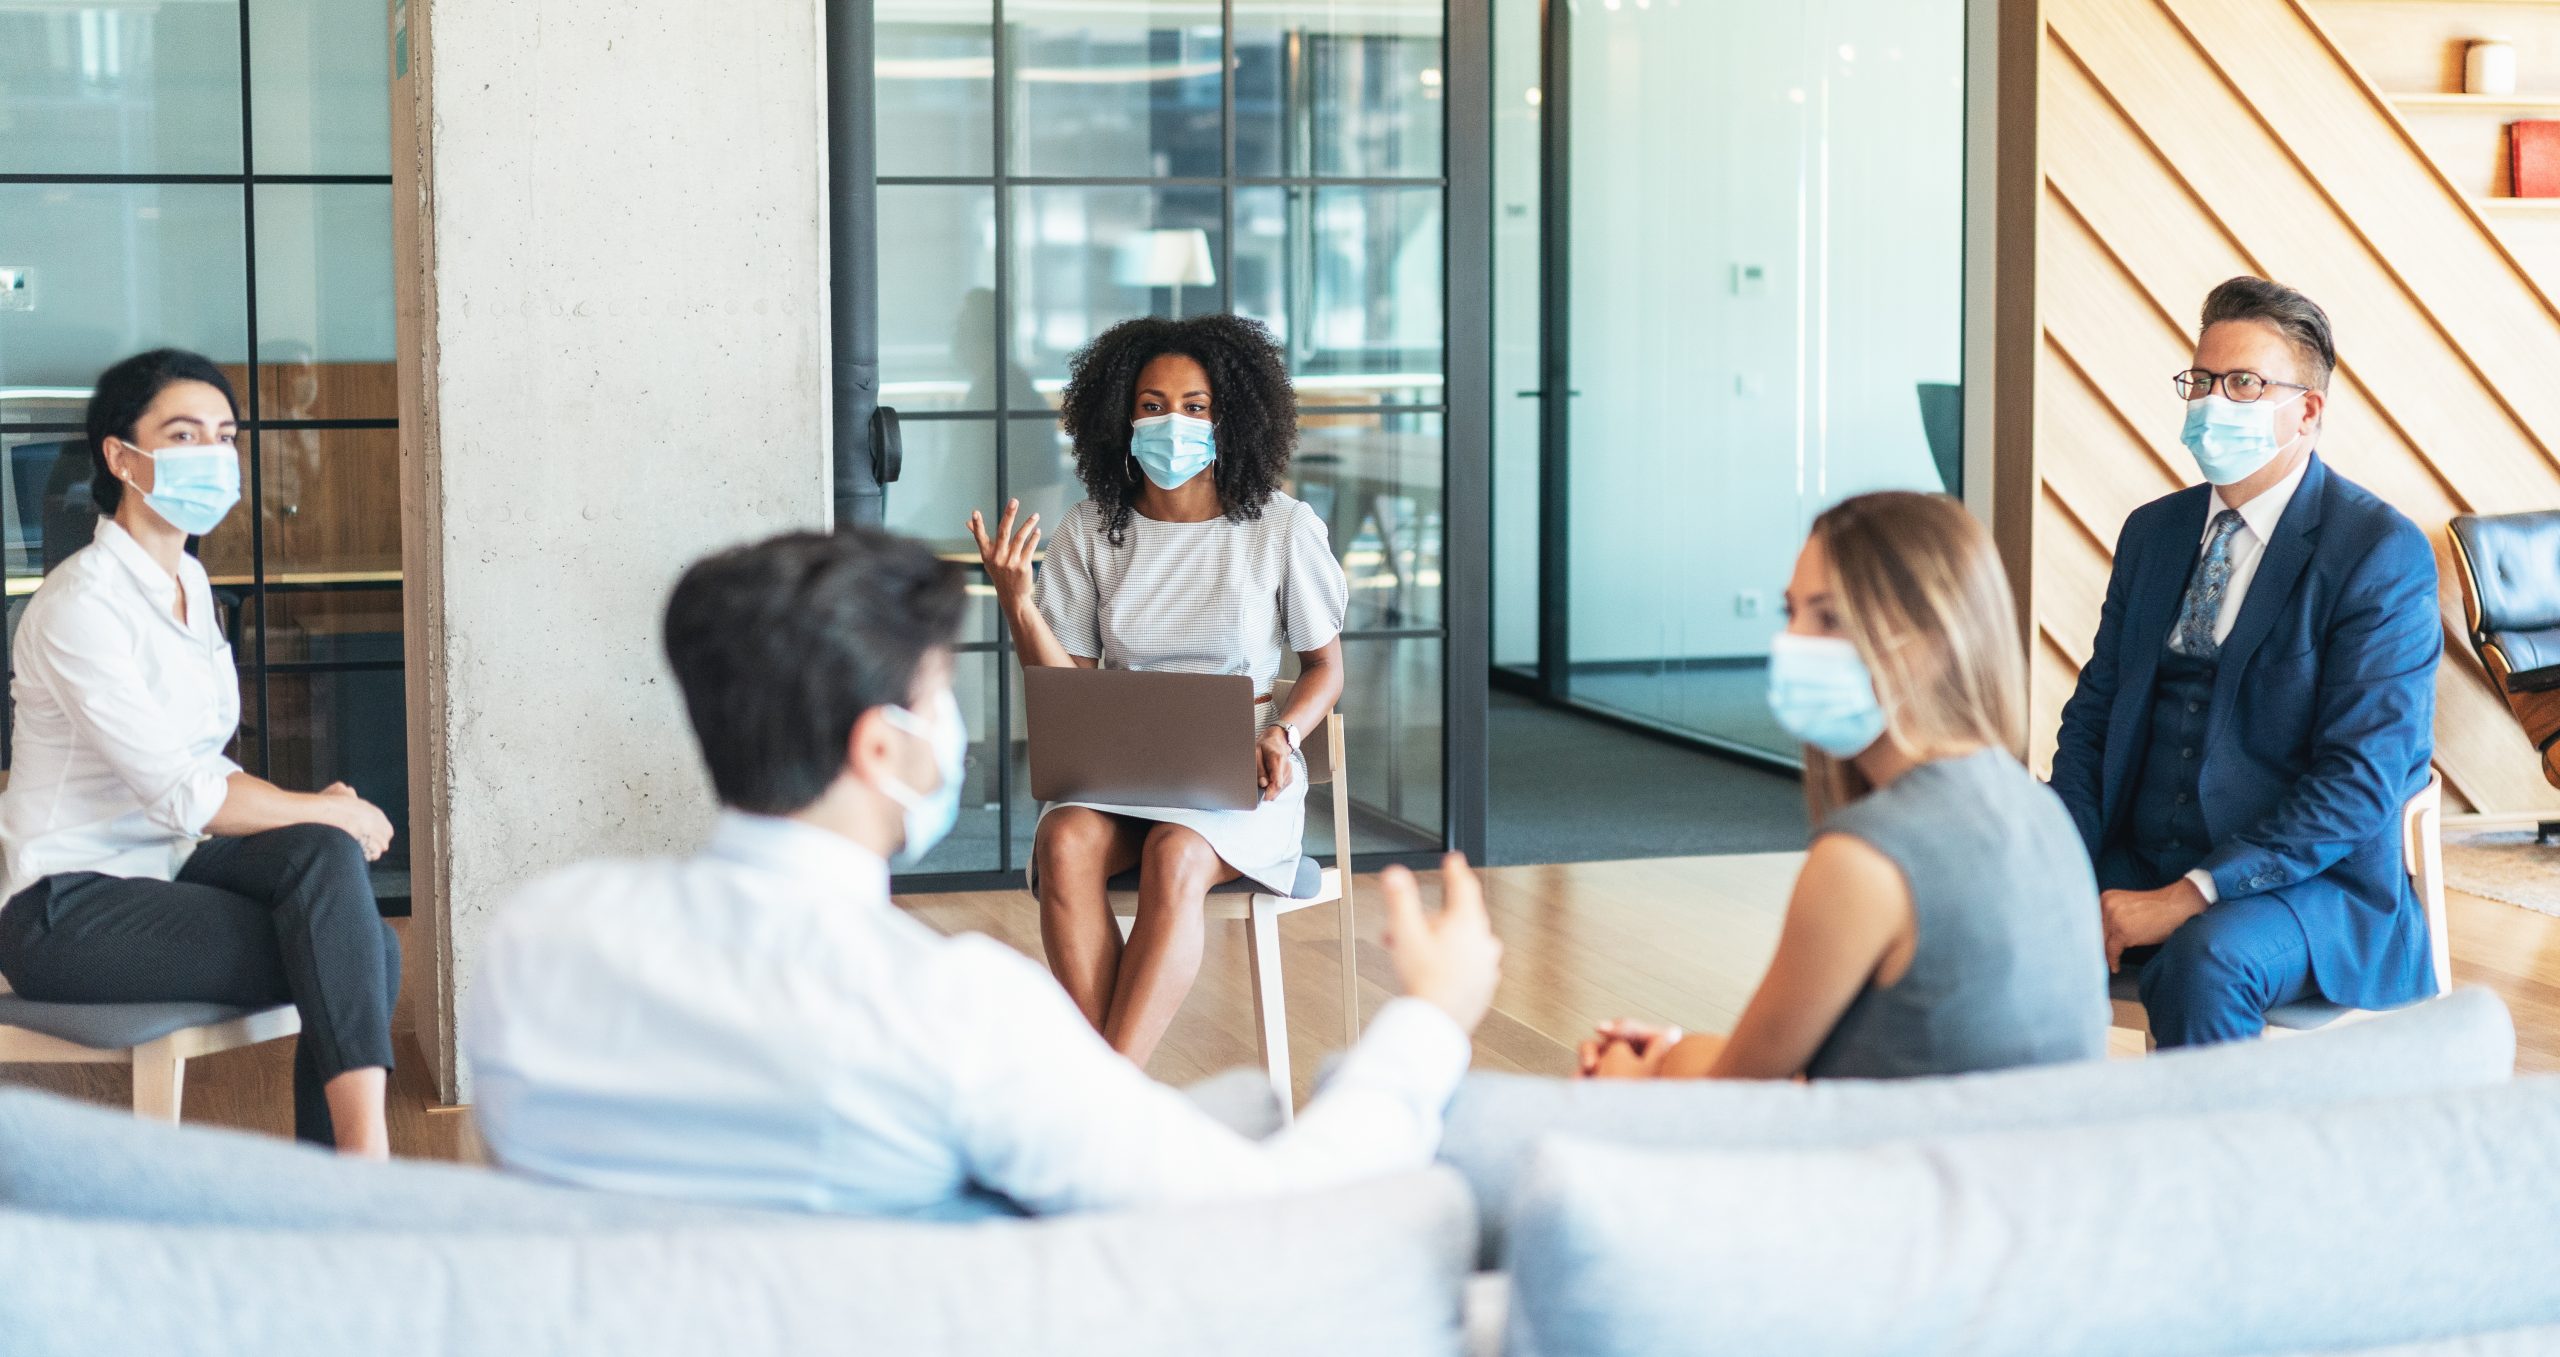 Business people on a meeting keeping distance and wearing face protective masks while discussing